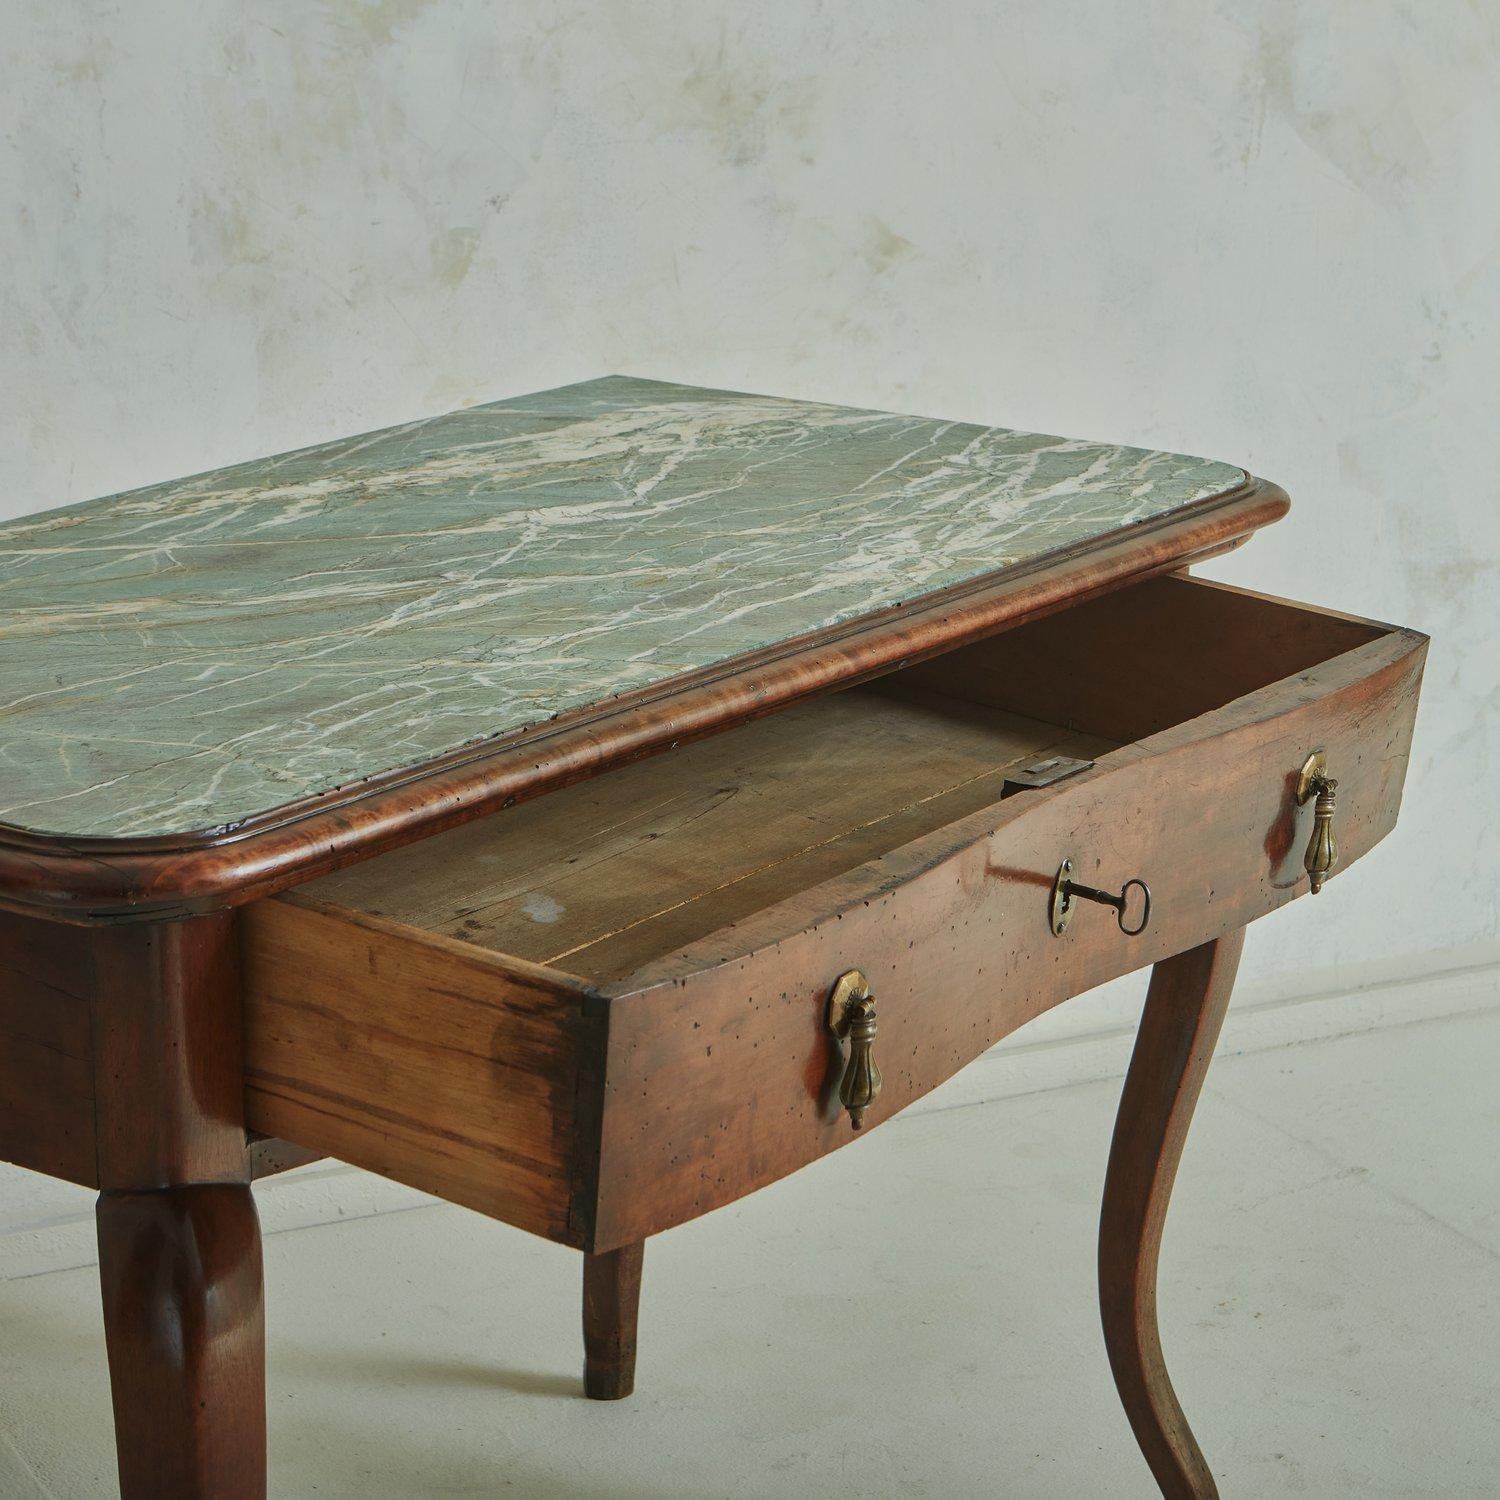 Antique Walnut Desk with Verde Alpi Marble Top, Italy  1